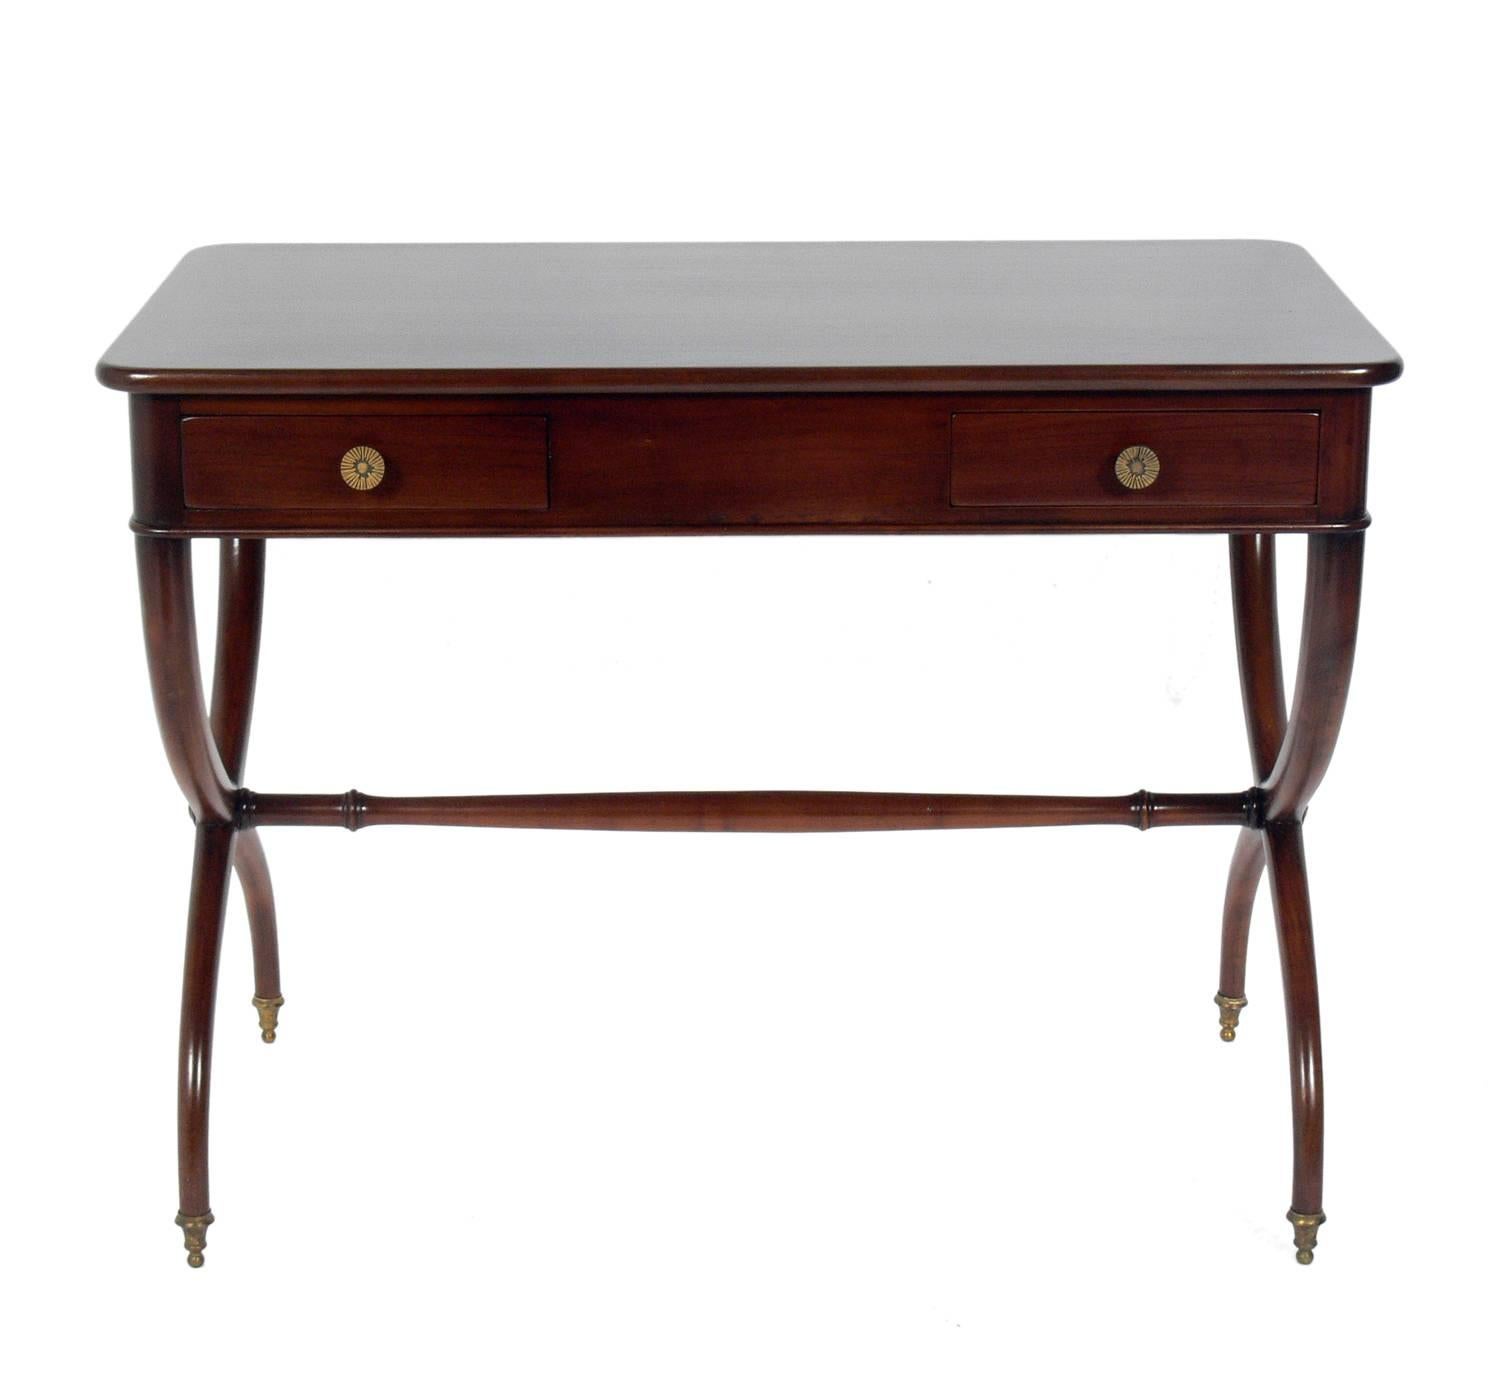 French Art Deco desk with curvaceous X-base, French, circa 1930s. It has been refinished and is ready to use. Retains brass tag in interior of drawer which reads 